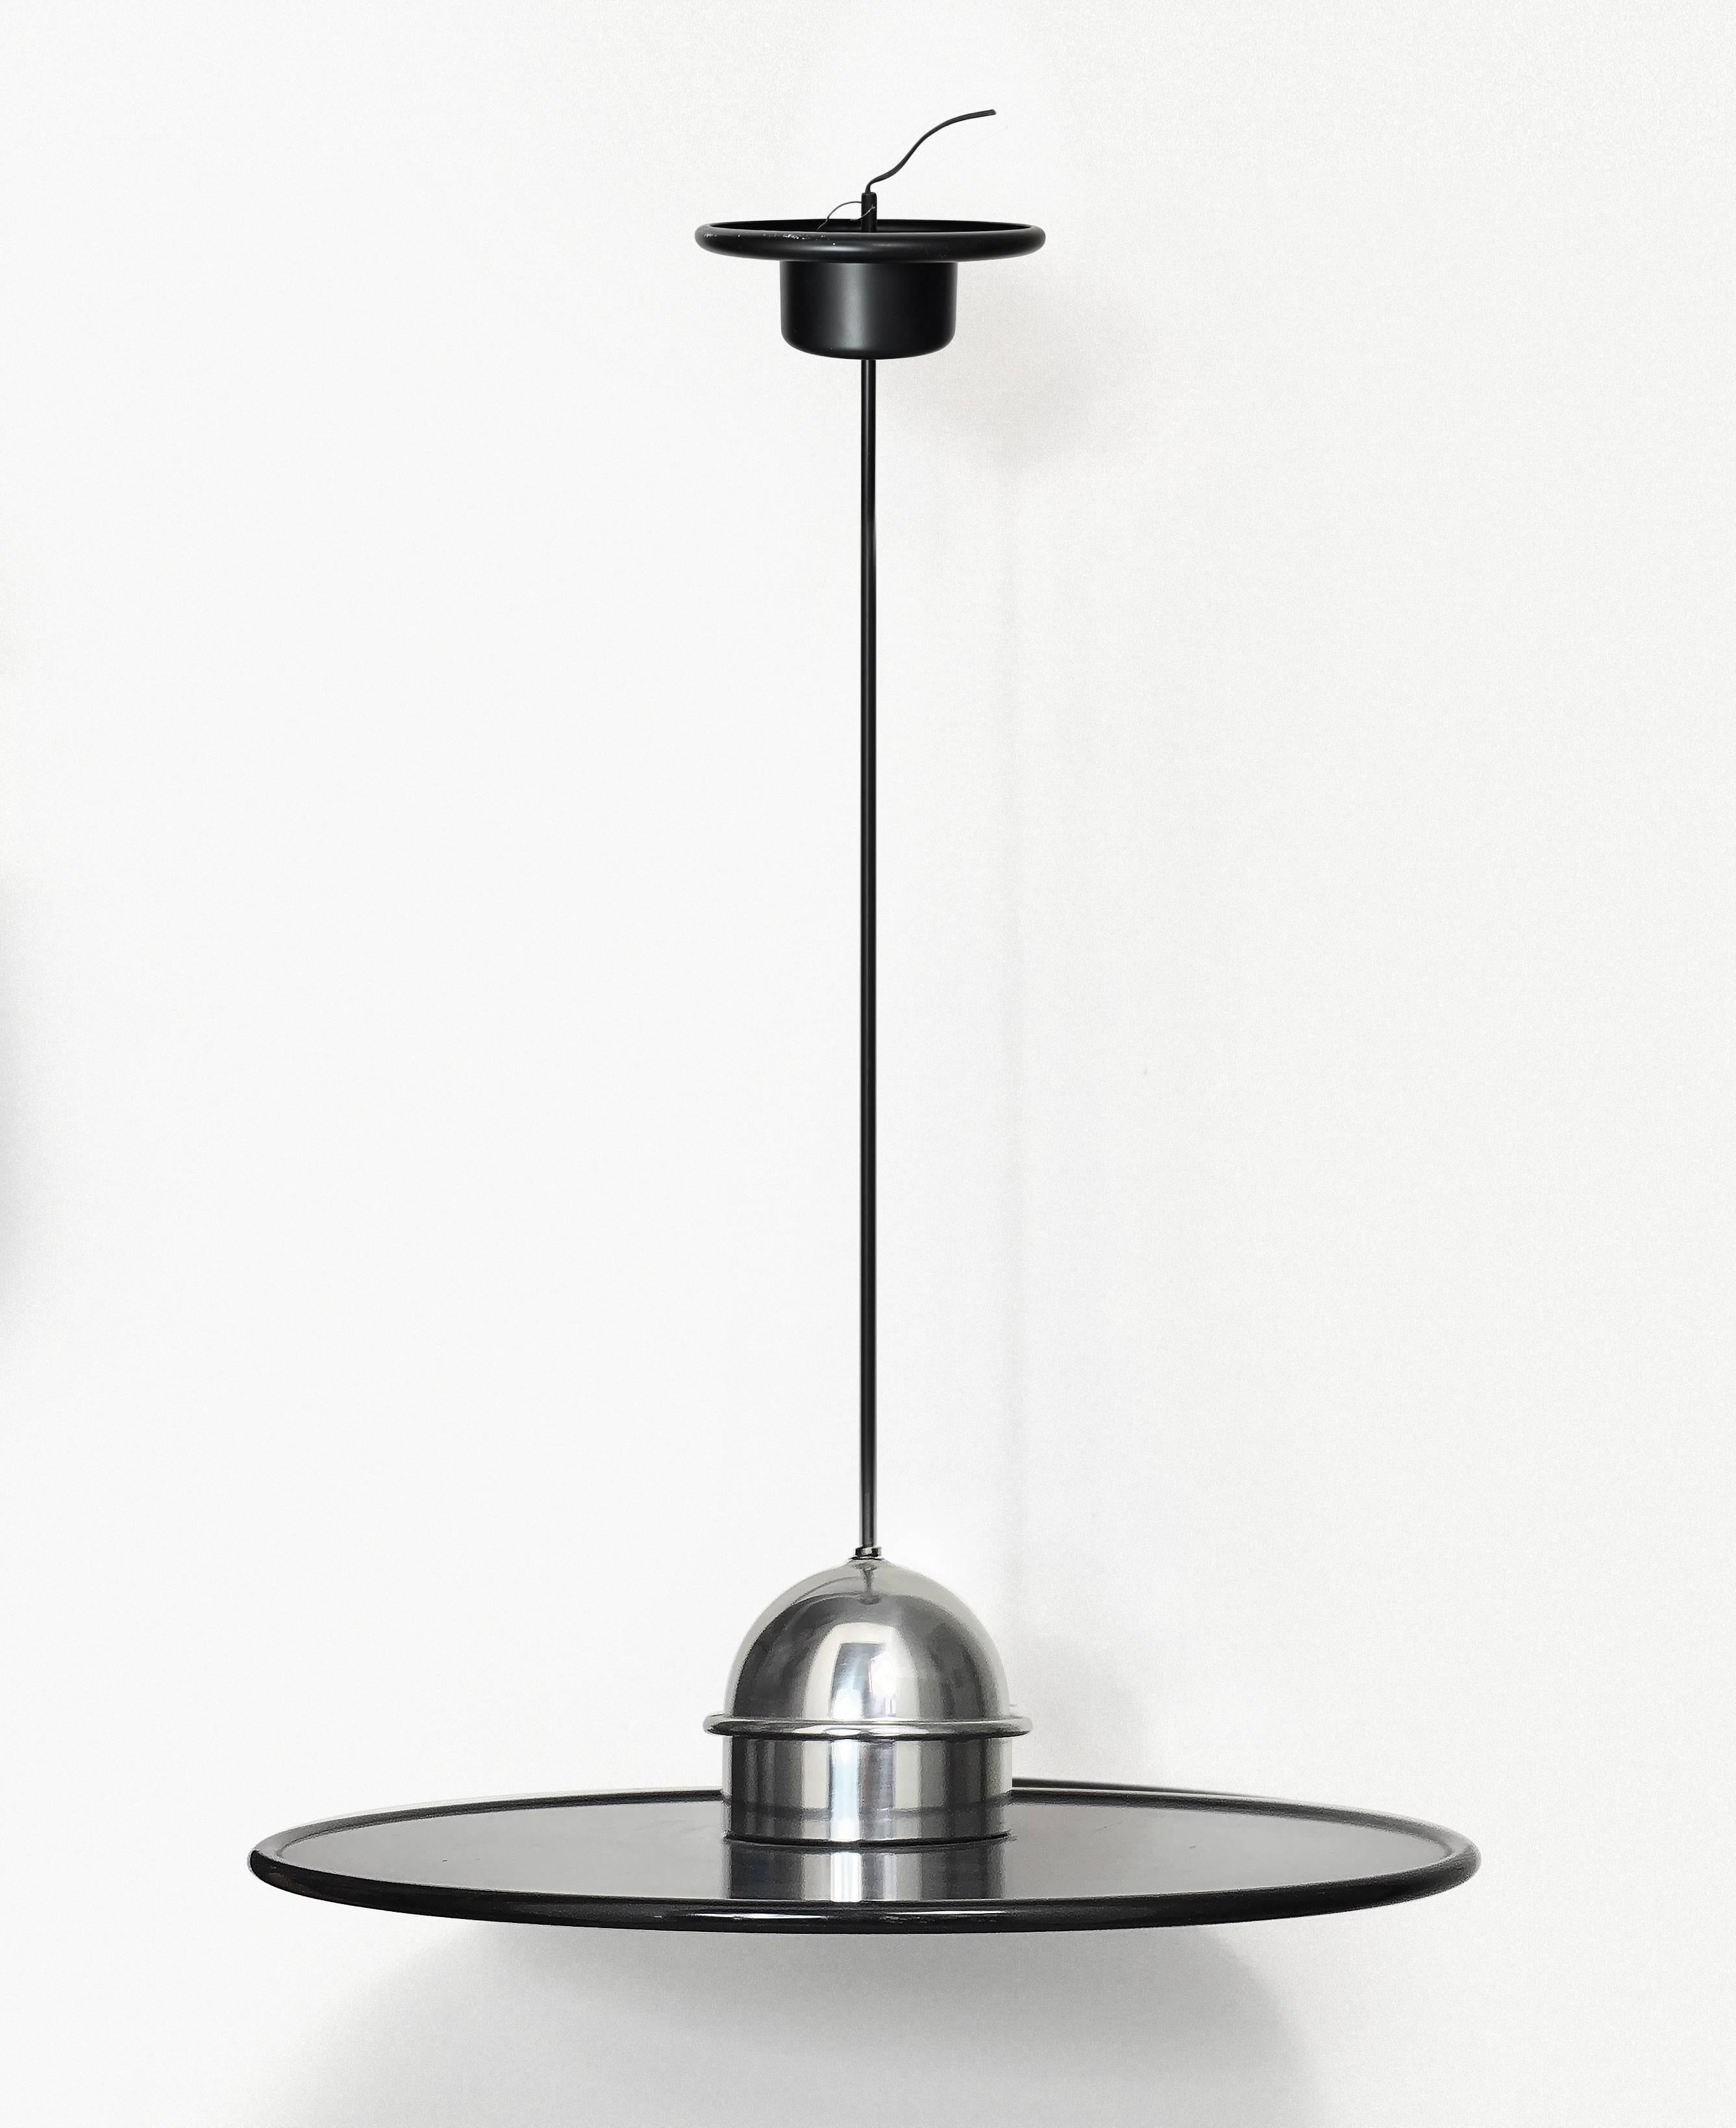 Metal ceiling lamp designed by Ettore Sottsass, produced by Stilnovo. Made of black enameled metal and polished aluminium. Marked with label sticker. The upper part of lamp was restored.